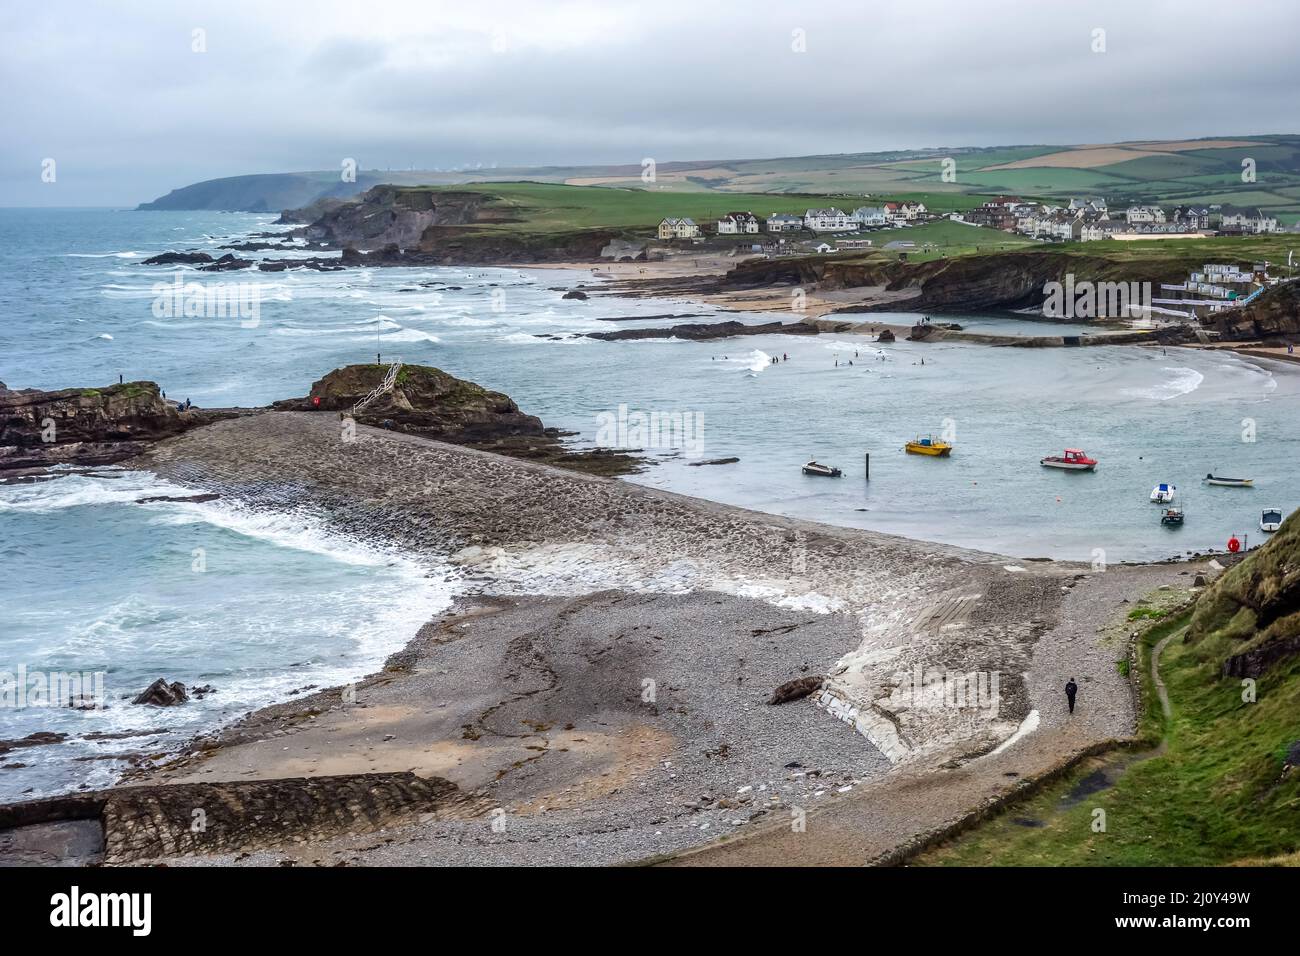 BUDE, CORNWALL/UK - AUGUST 15 : Scenic view of the Bude coastline in Cornwall on August 15, 2013. Unidentified people. Stock Photo